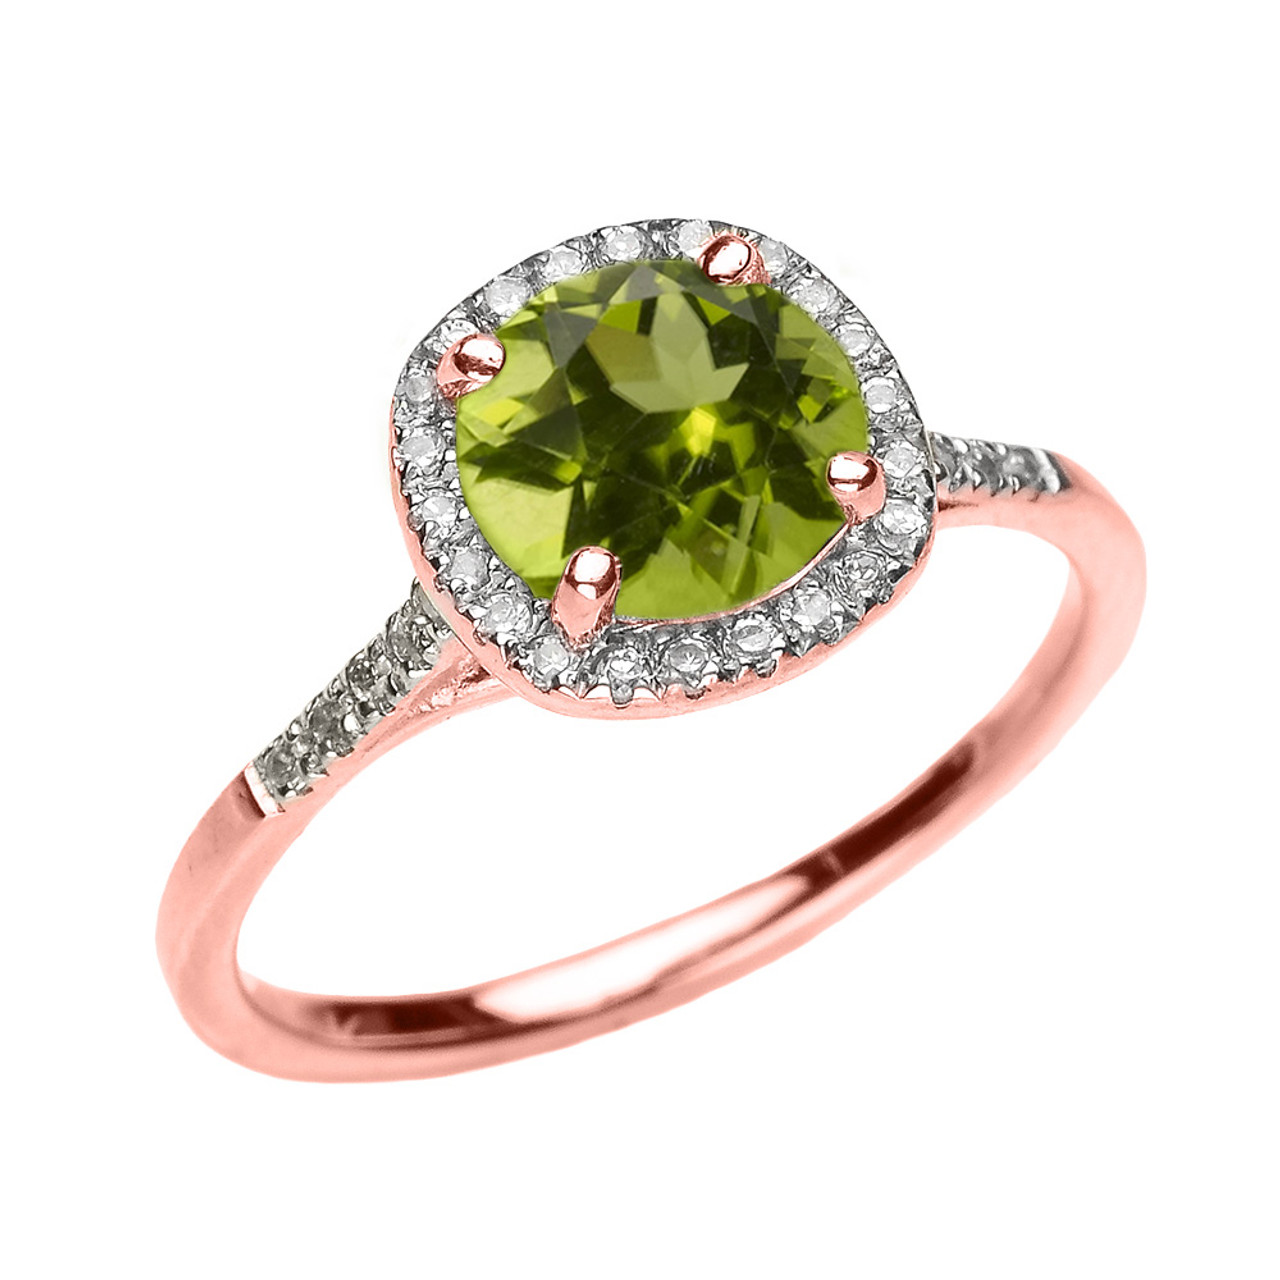 Buy 14k Gold Peridot and Diamond Stackable Ring at Best Price